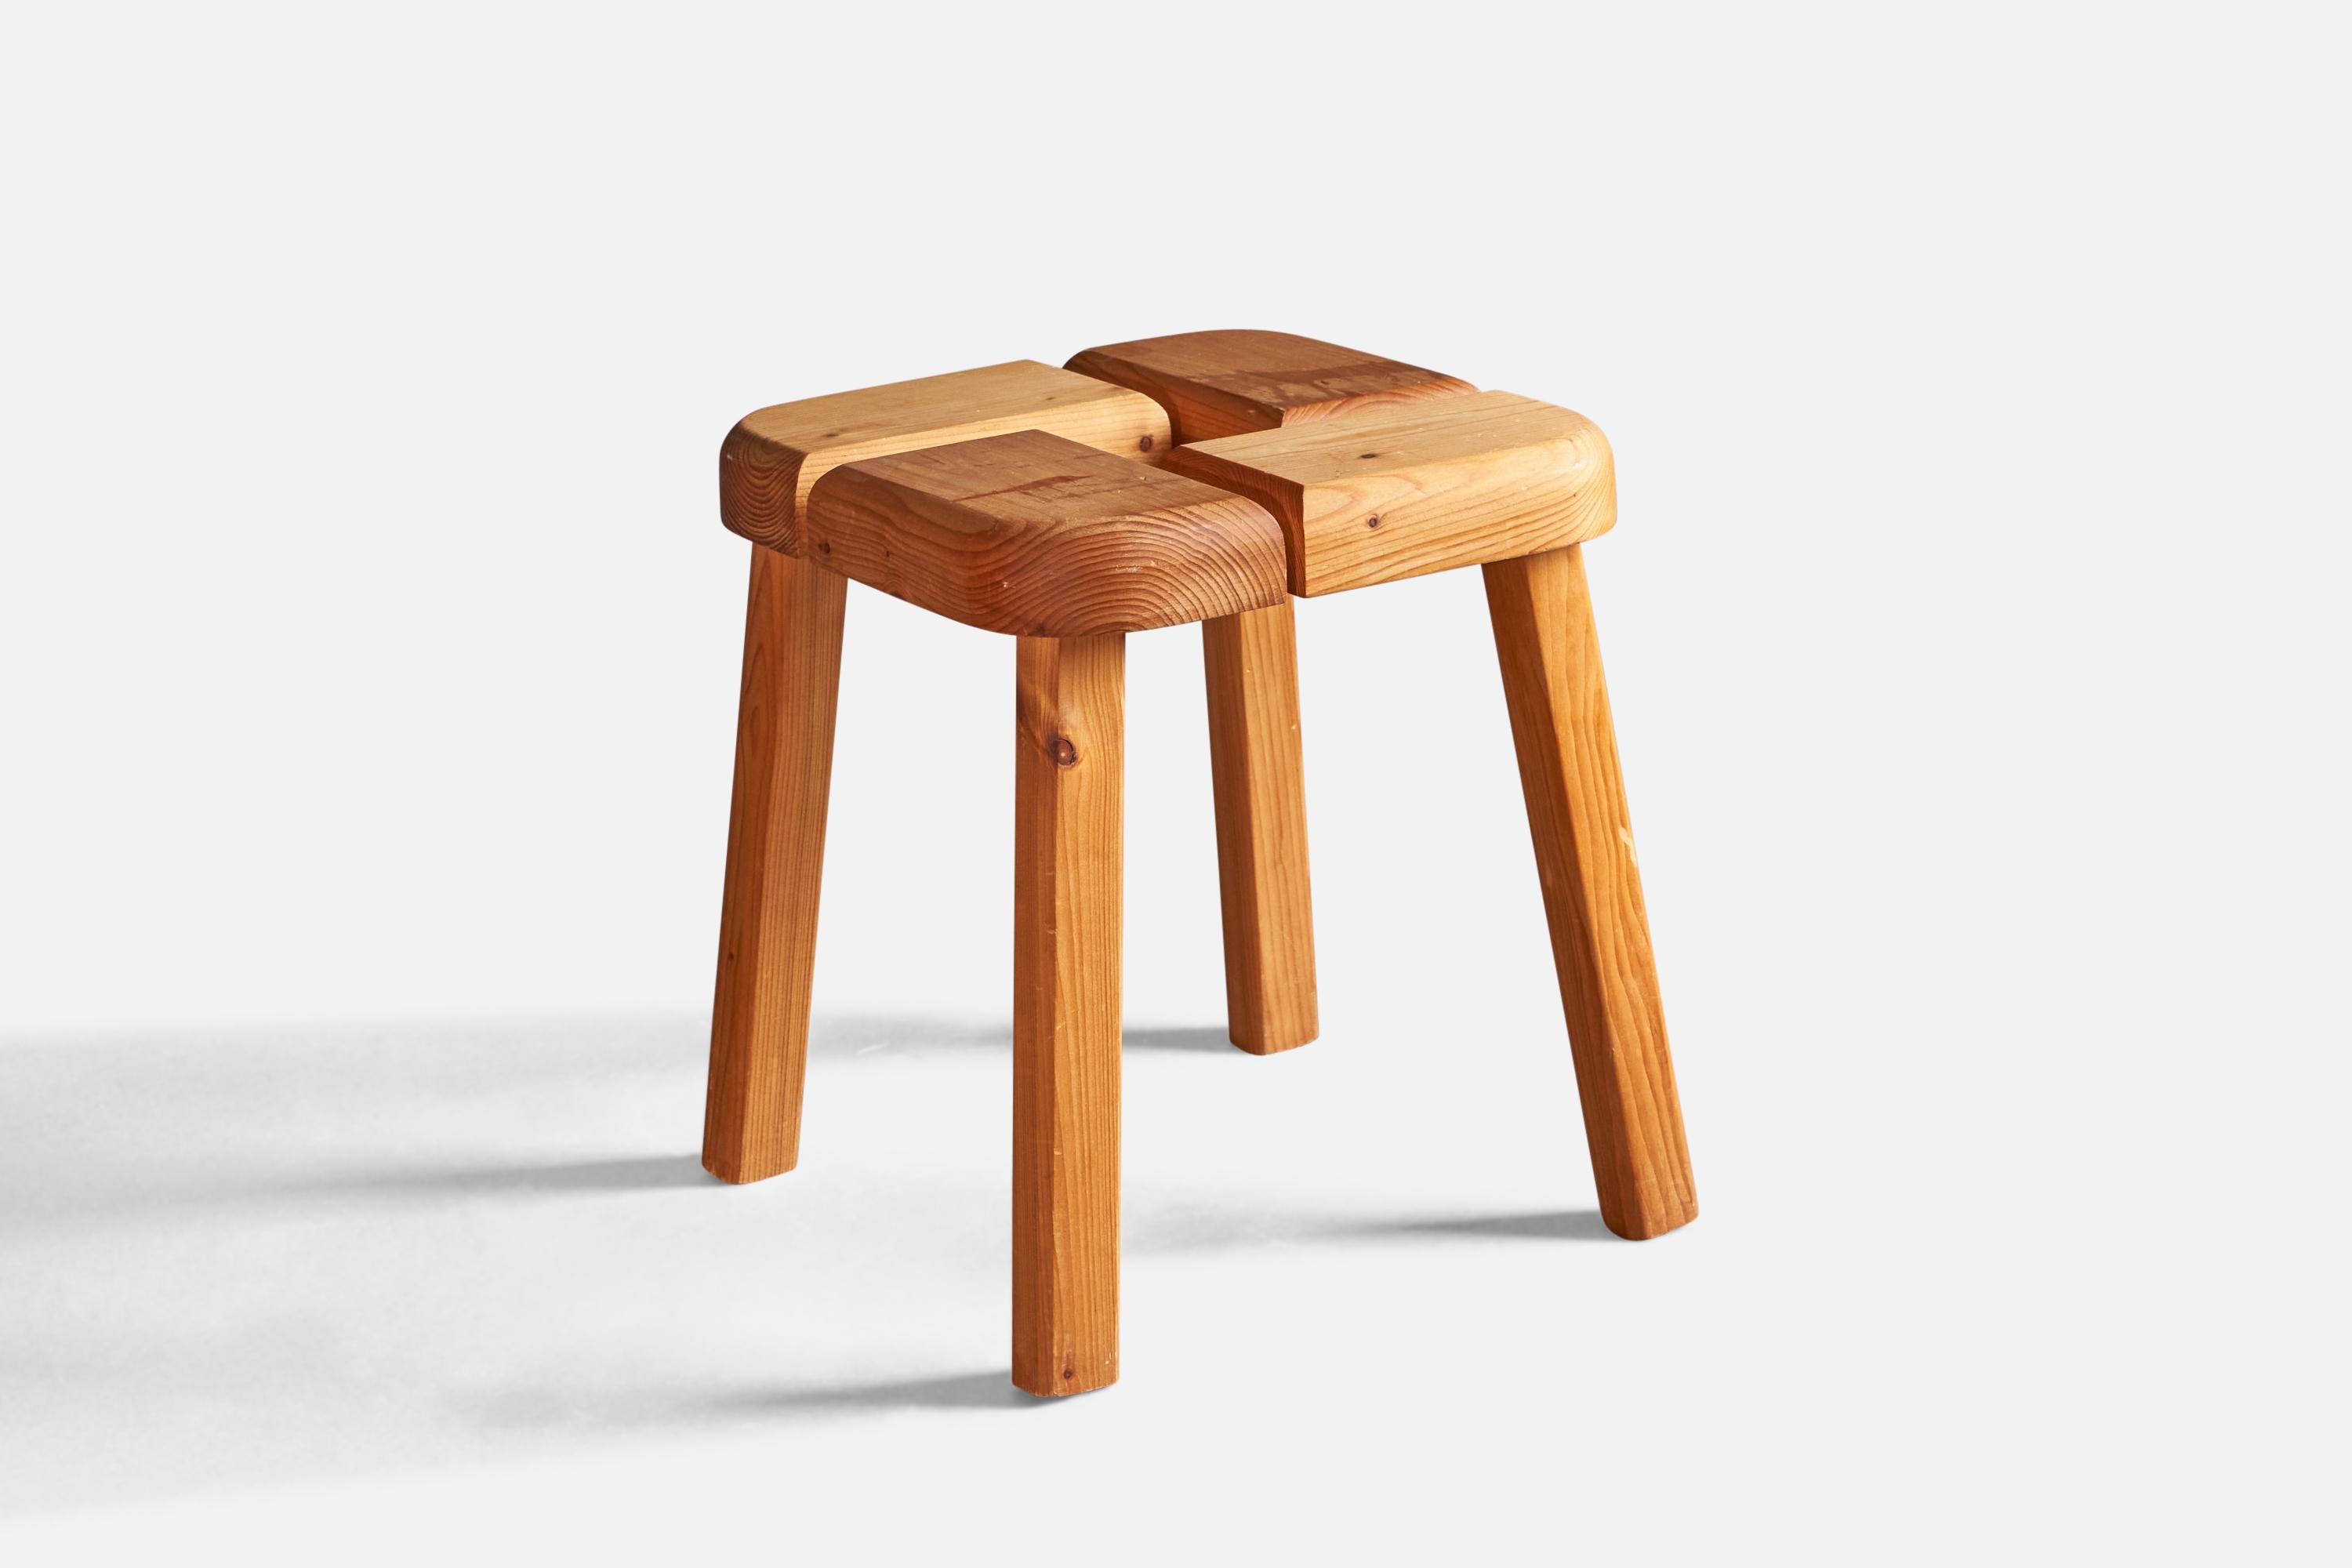 A pine stool, design and production attributed to Olof Ottelin, Finland, 1970s.